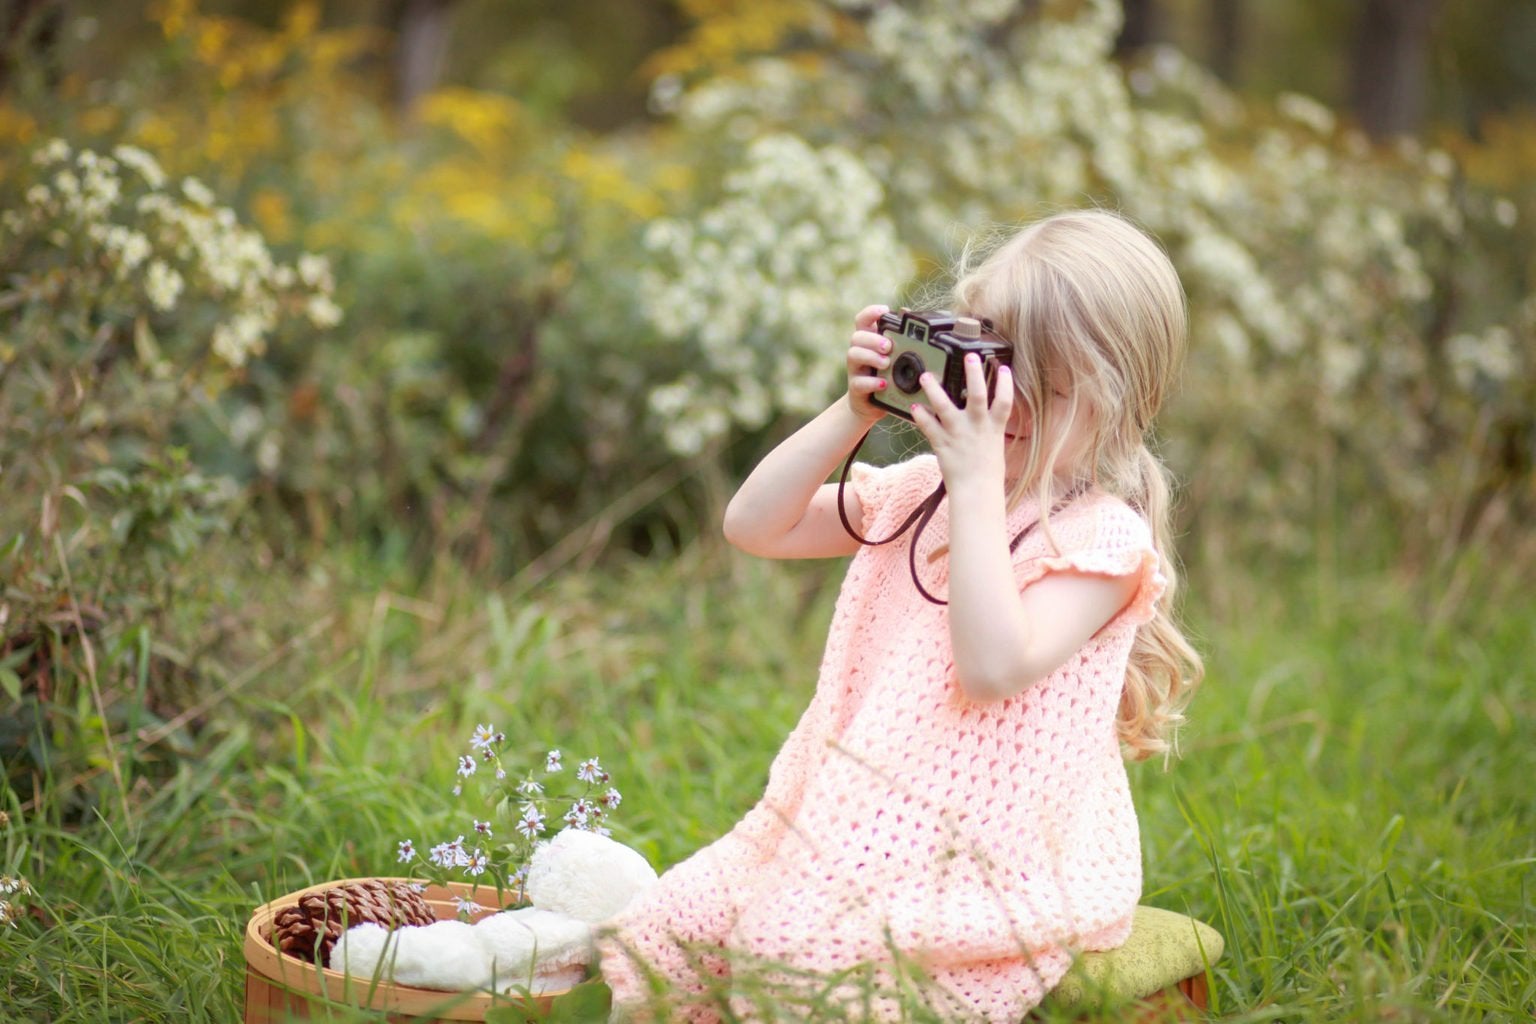 photo of child with camera